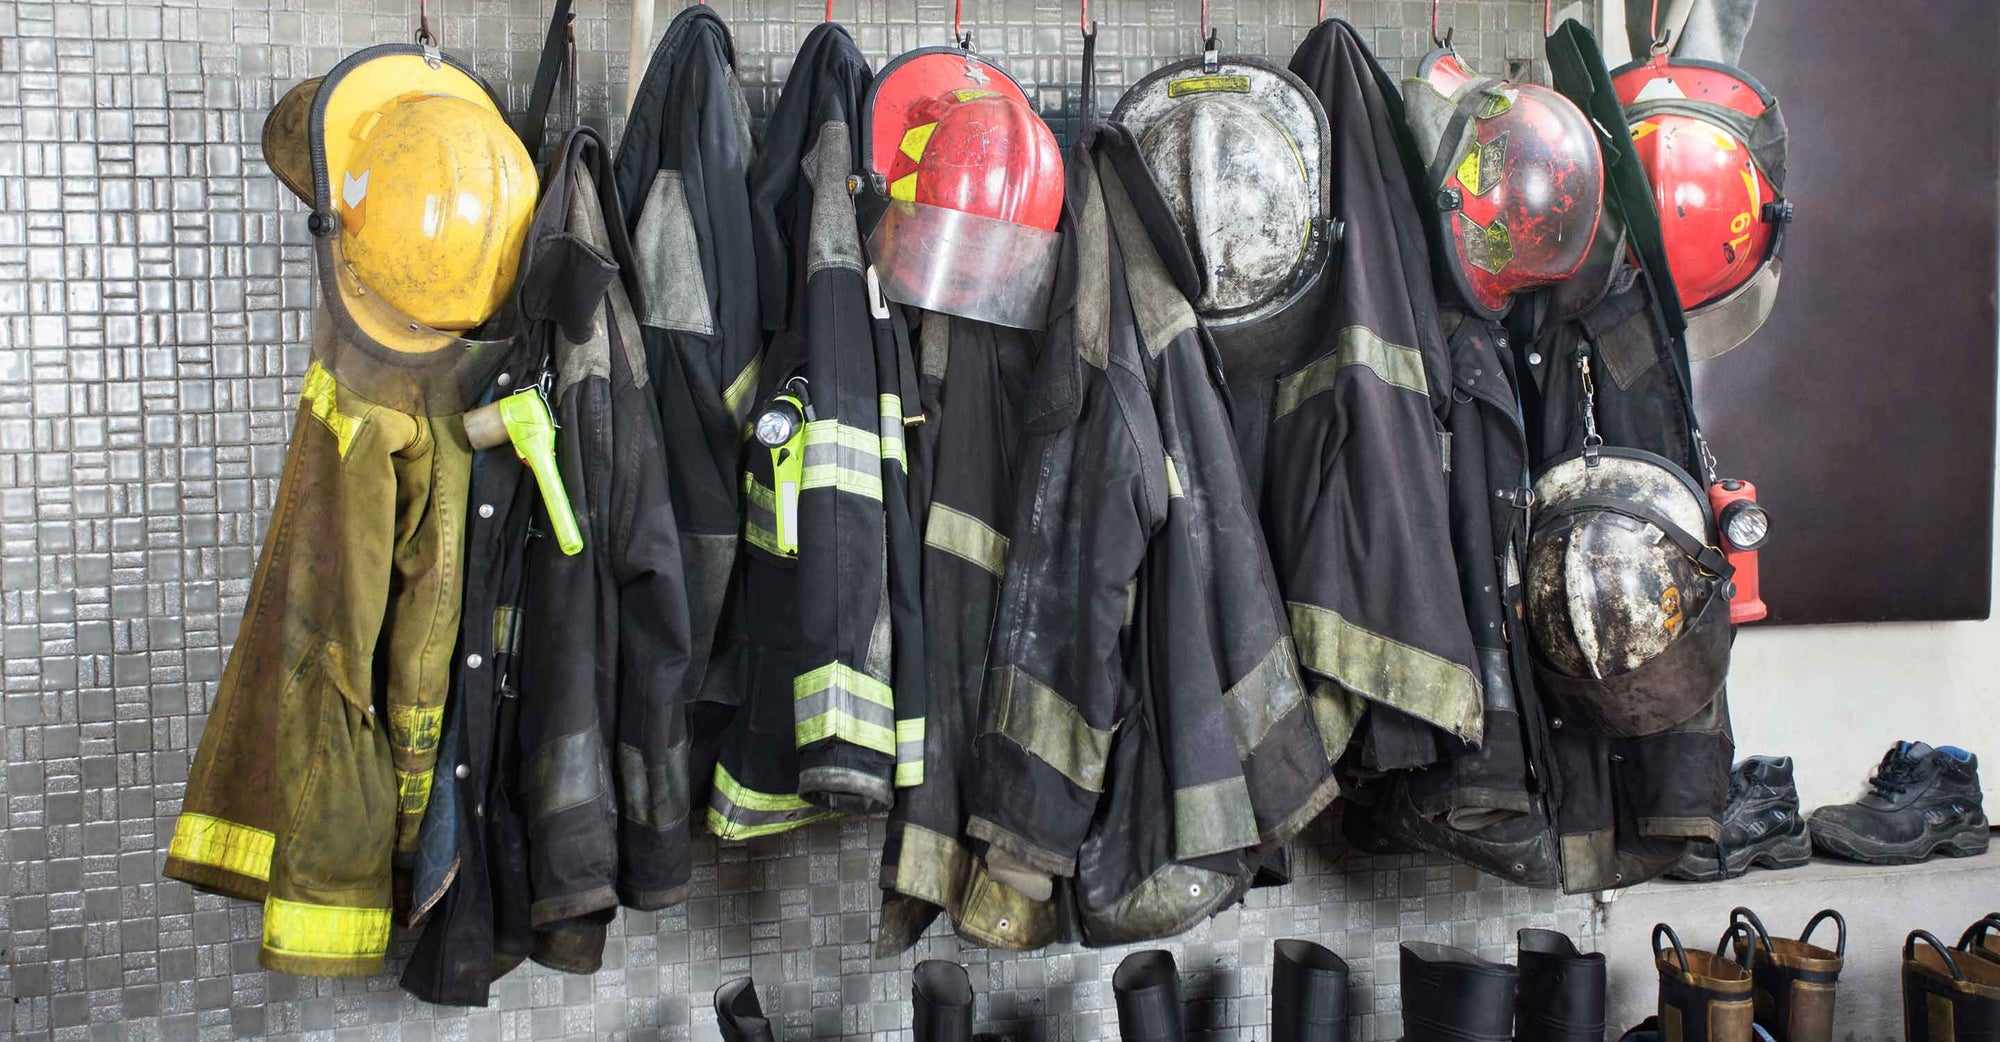 Nashville firefighters warned about mold in 33 stations